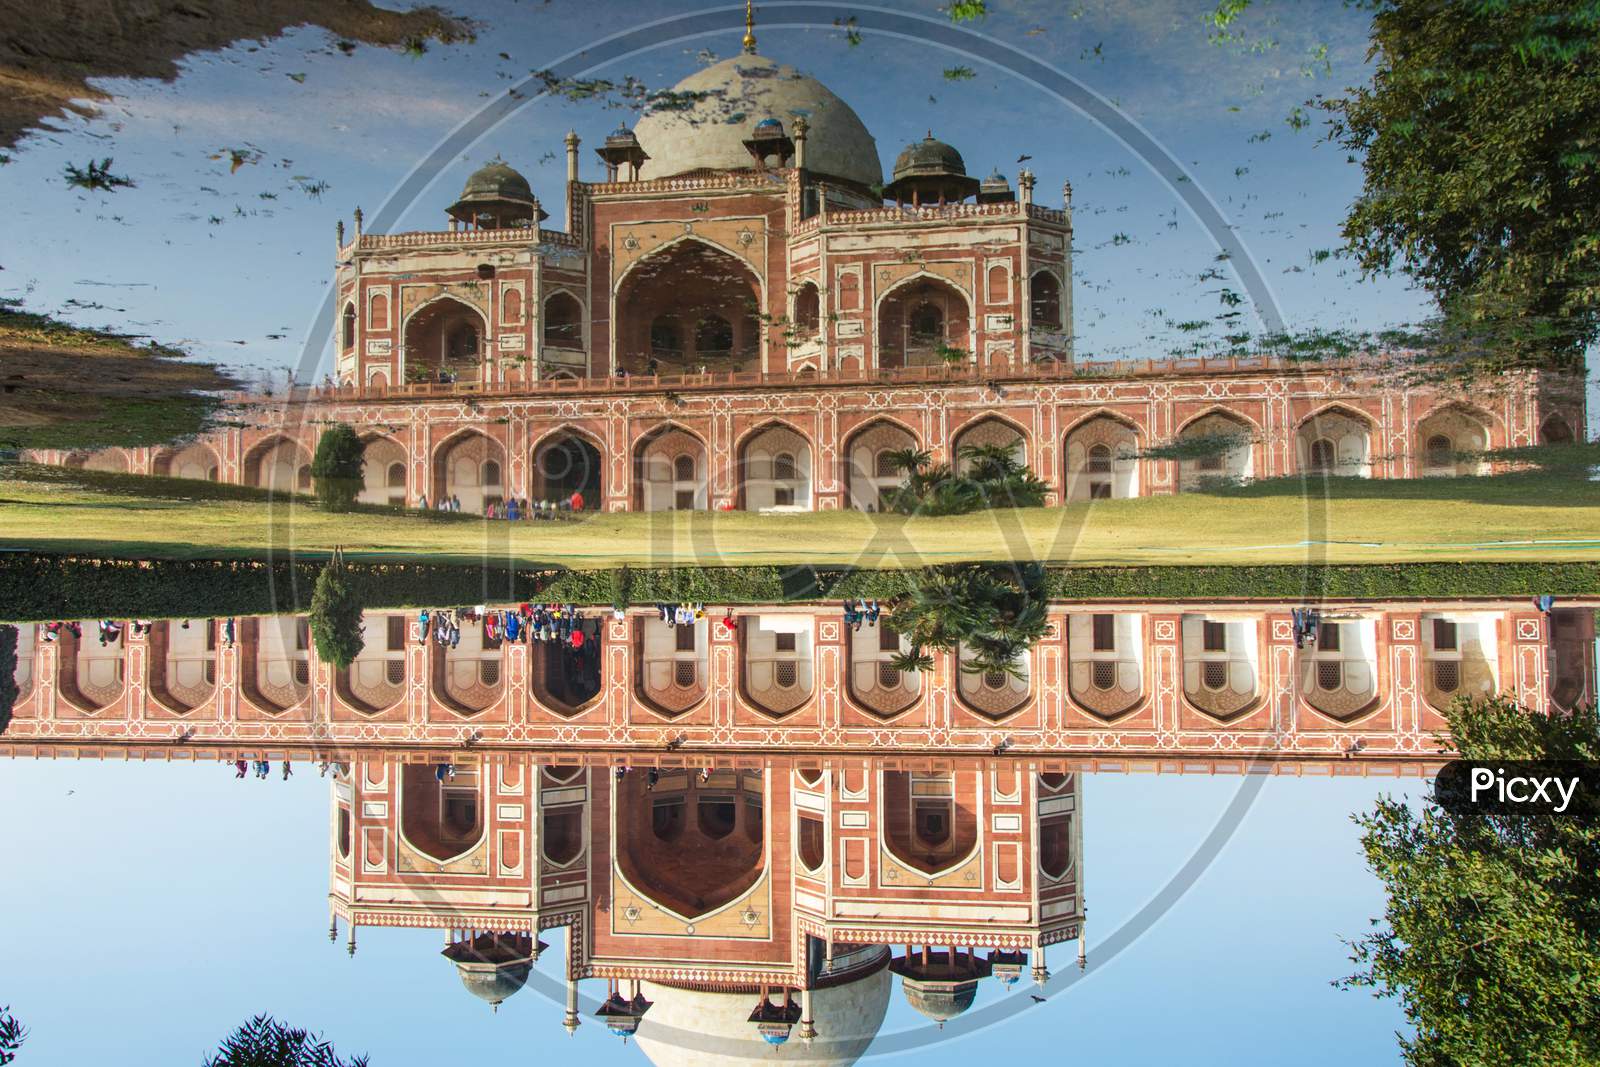 Reflection of Humayun’s Tomb on the waterlogged gardens.